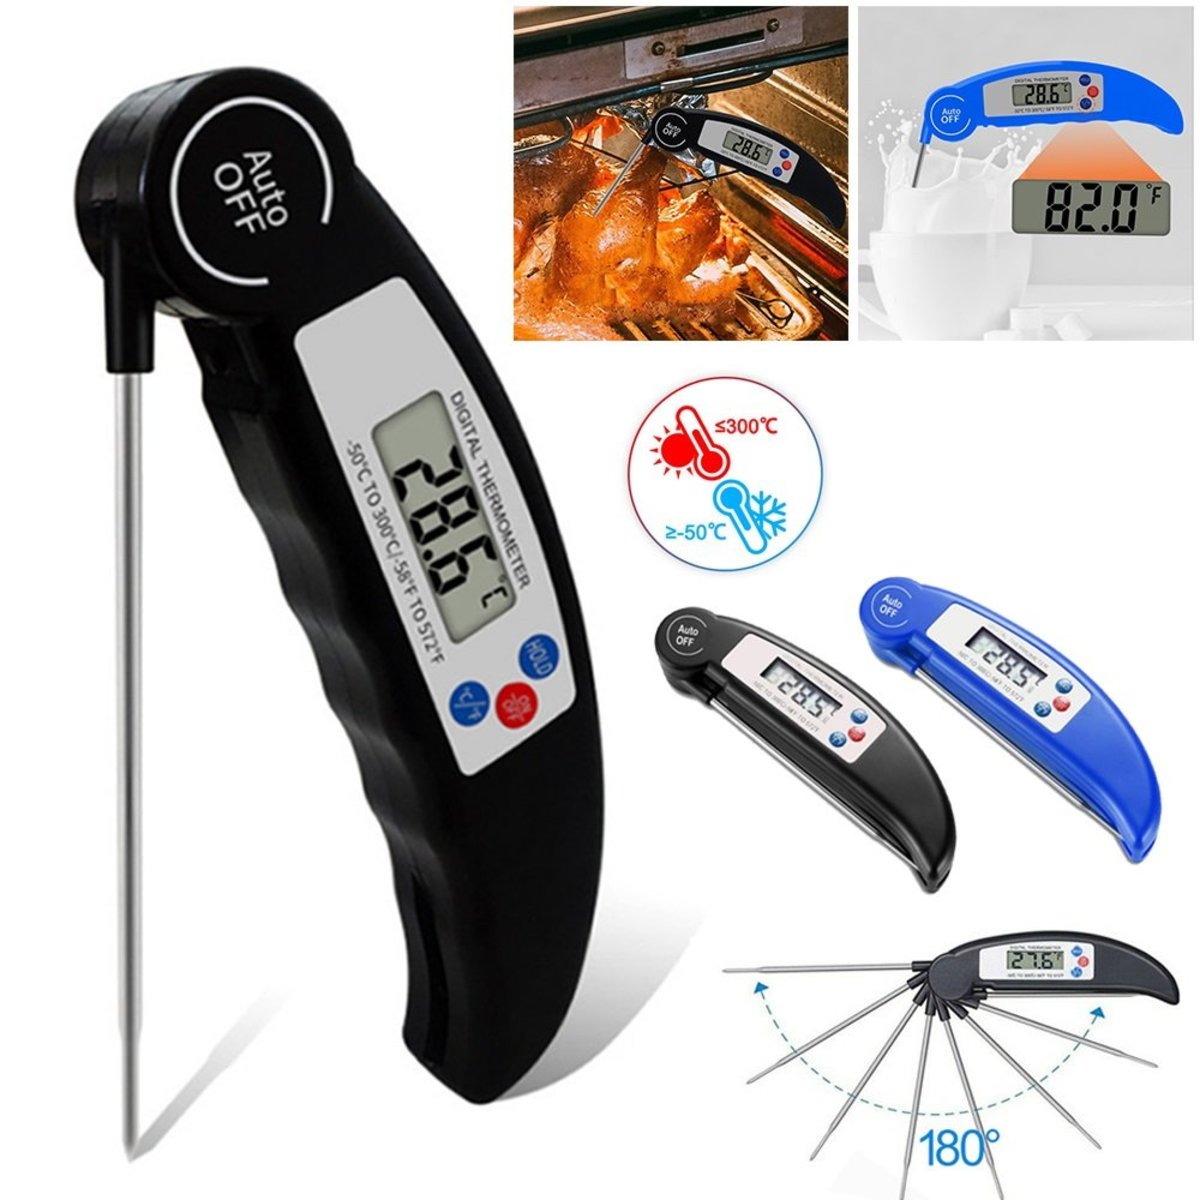 Foldable Digital Food Thermometer Probe Temperature Kitchen Cooking BBQ Meat Jam